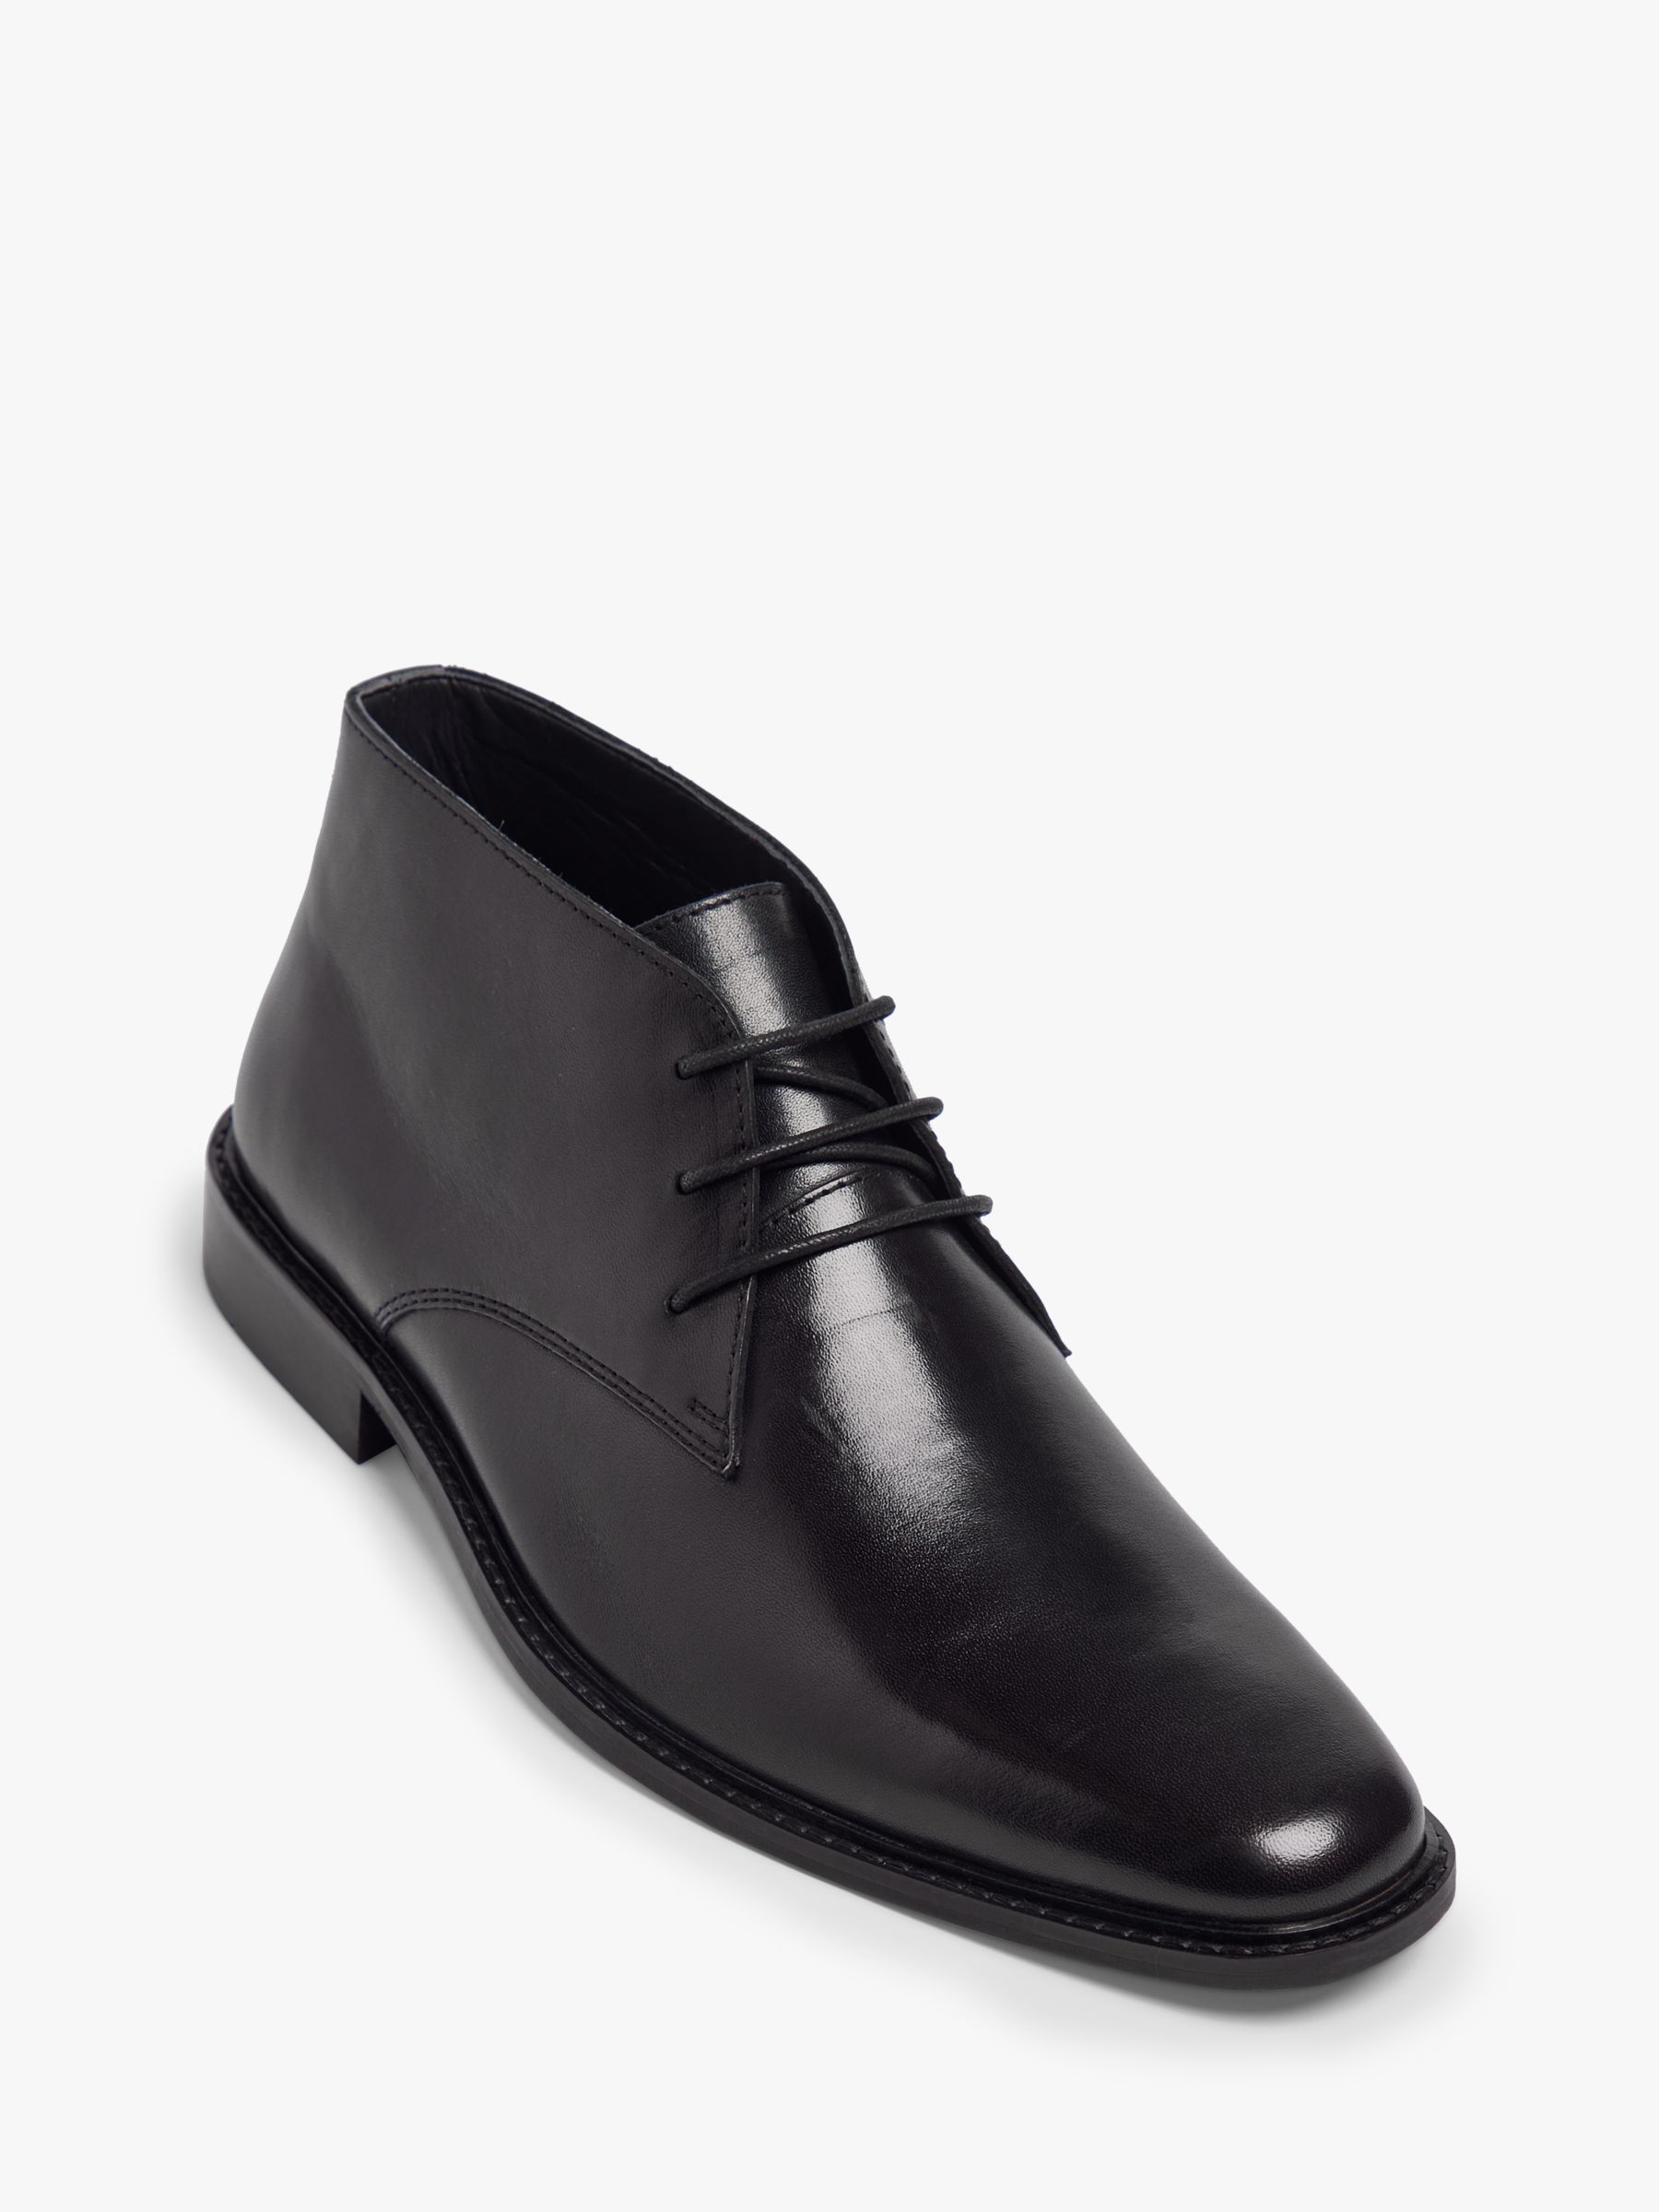 Pod Byron Leather Lace-Up Ankle Boots, Black at John Lewis & Partners